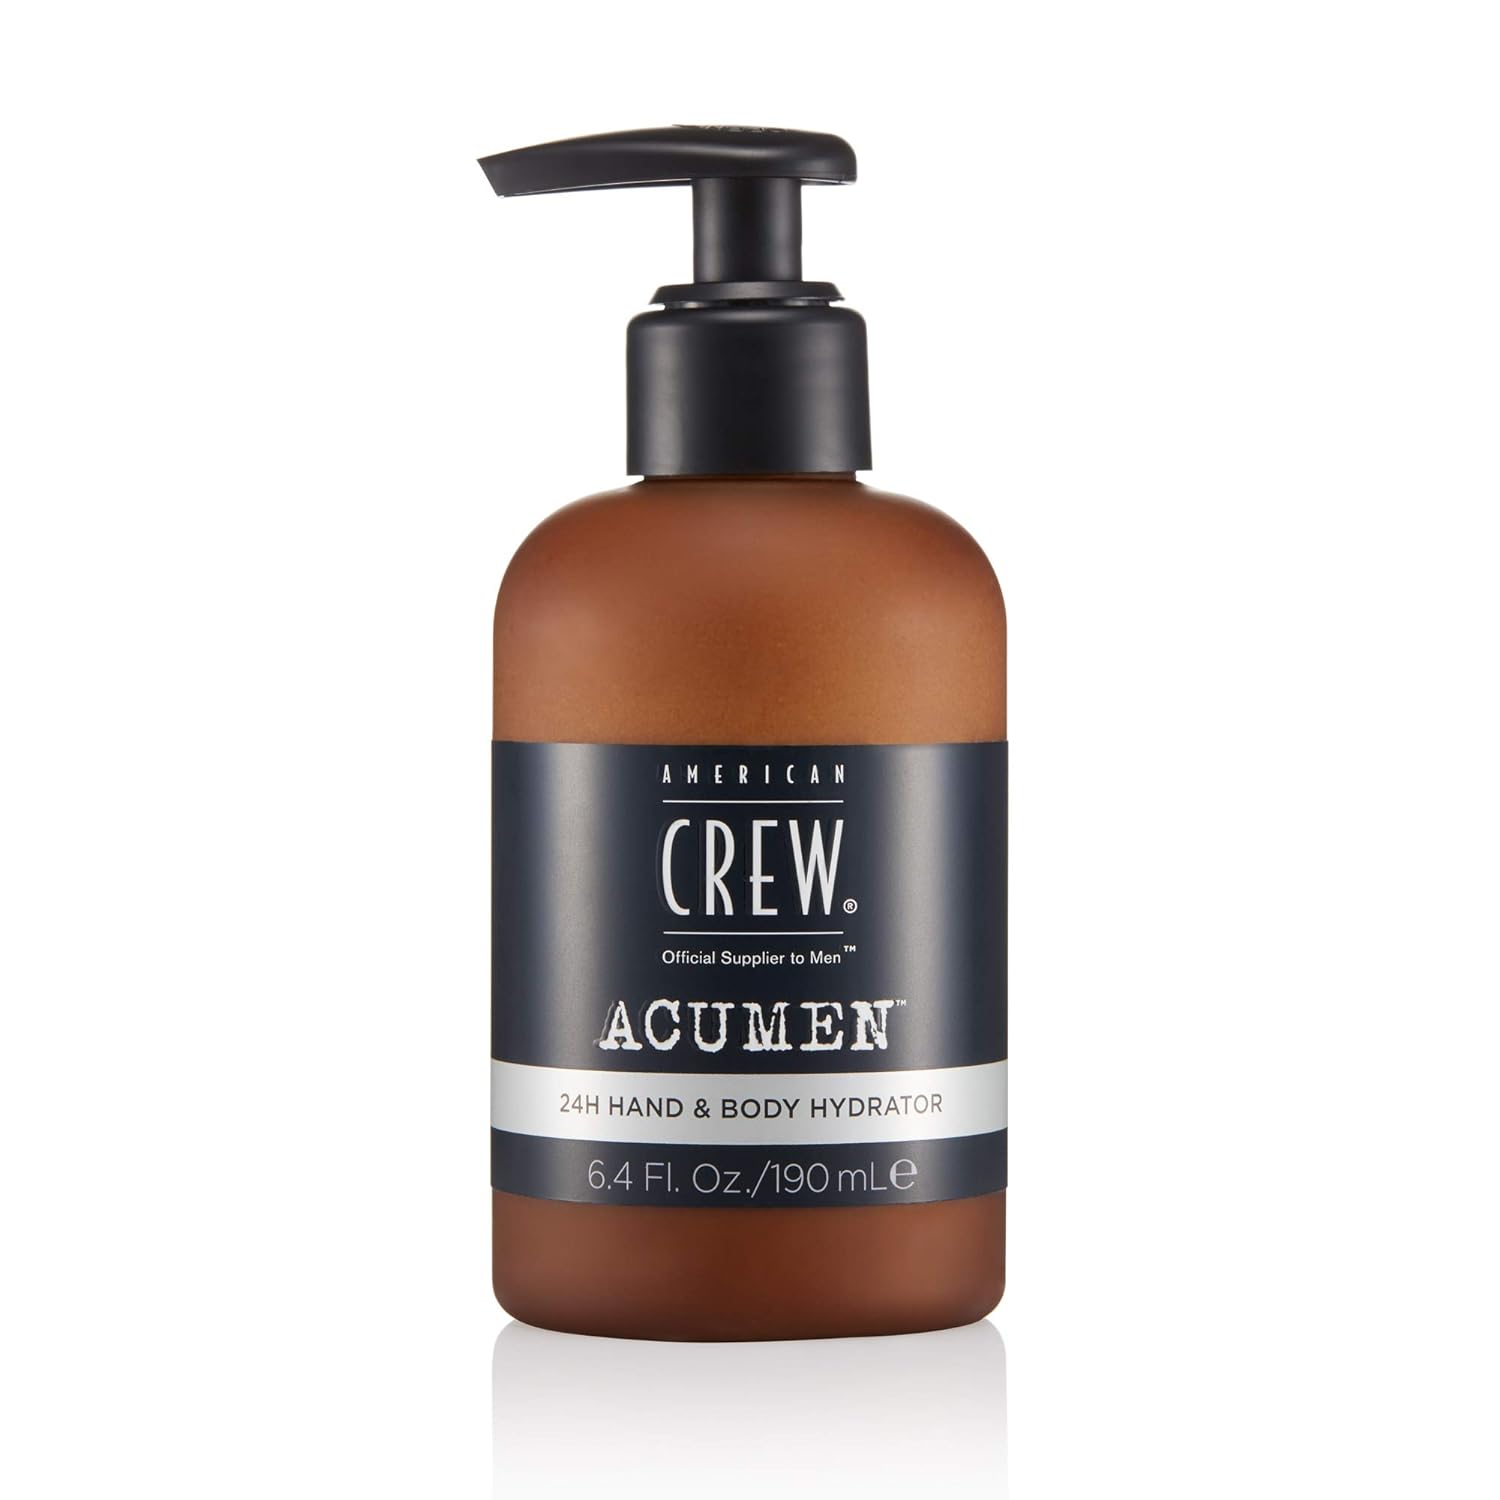 American Crew Men's Hand & Body Lotion, 24 Hour Help, Acumen Daily Lotion for Moisturized & Refreshing Skin, 6.4 Fl Oz